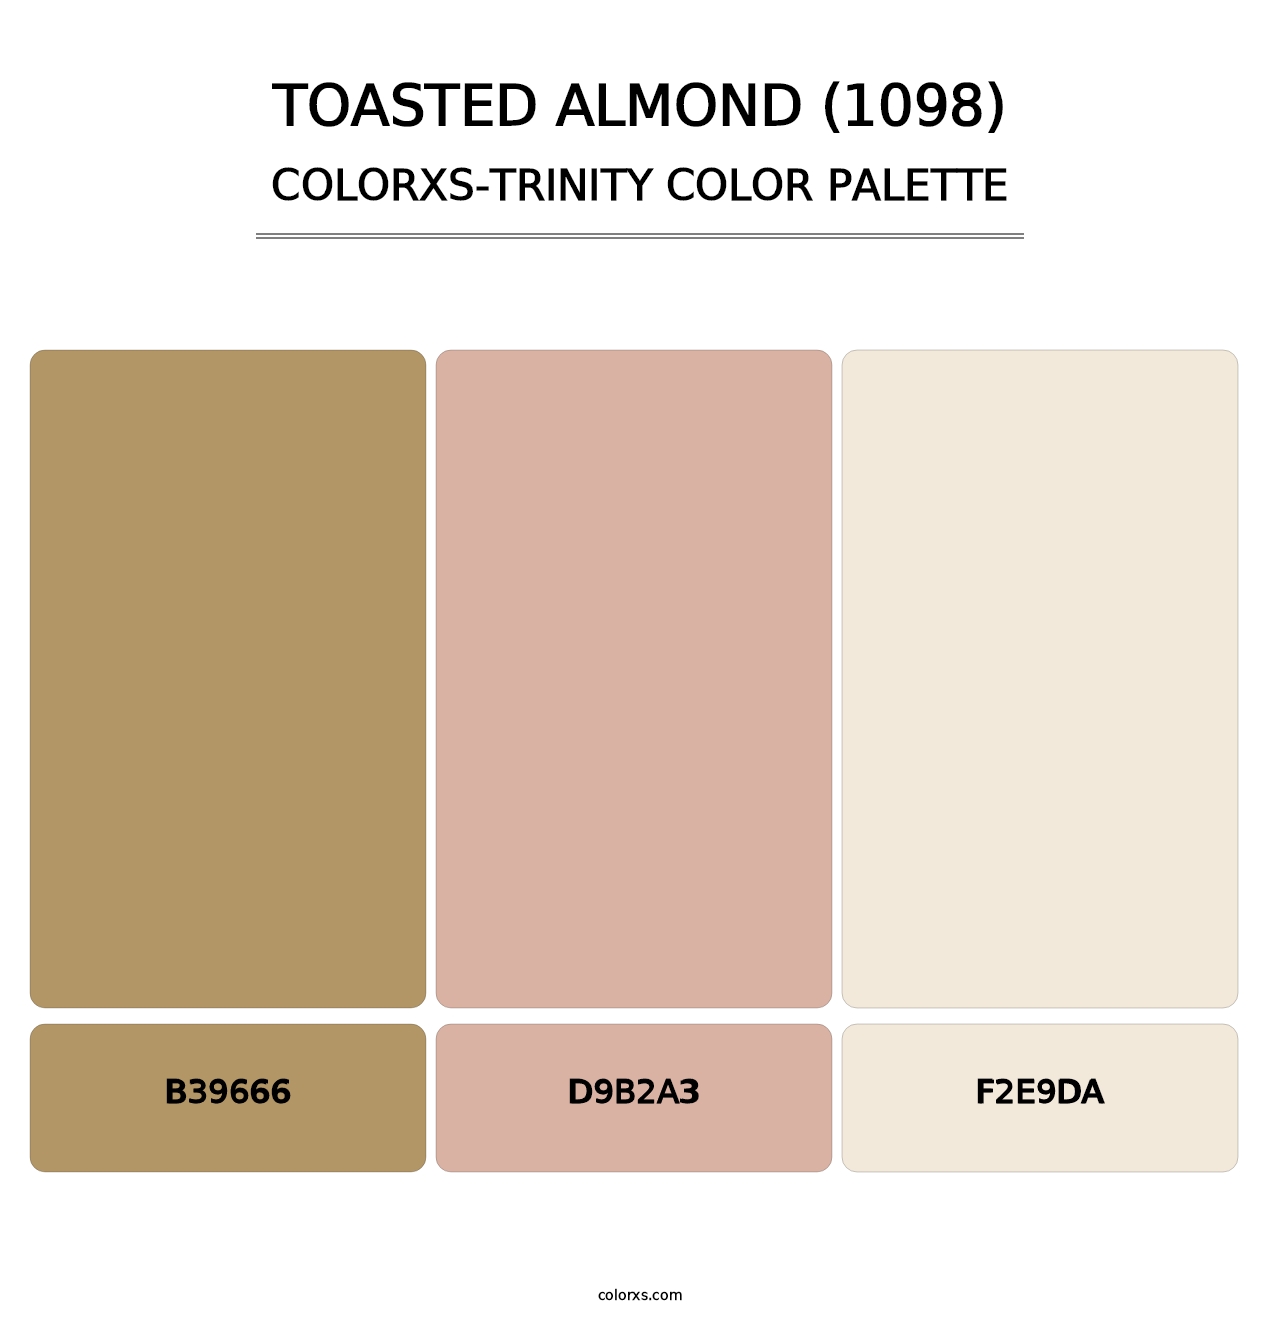 Toasted Almond (1098) - Colorxs Trinity Palette